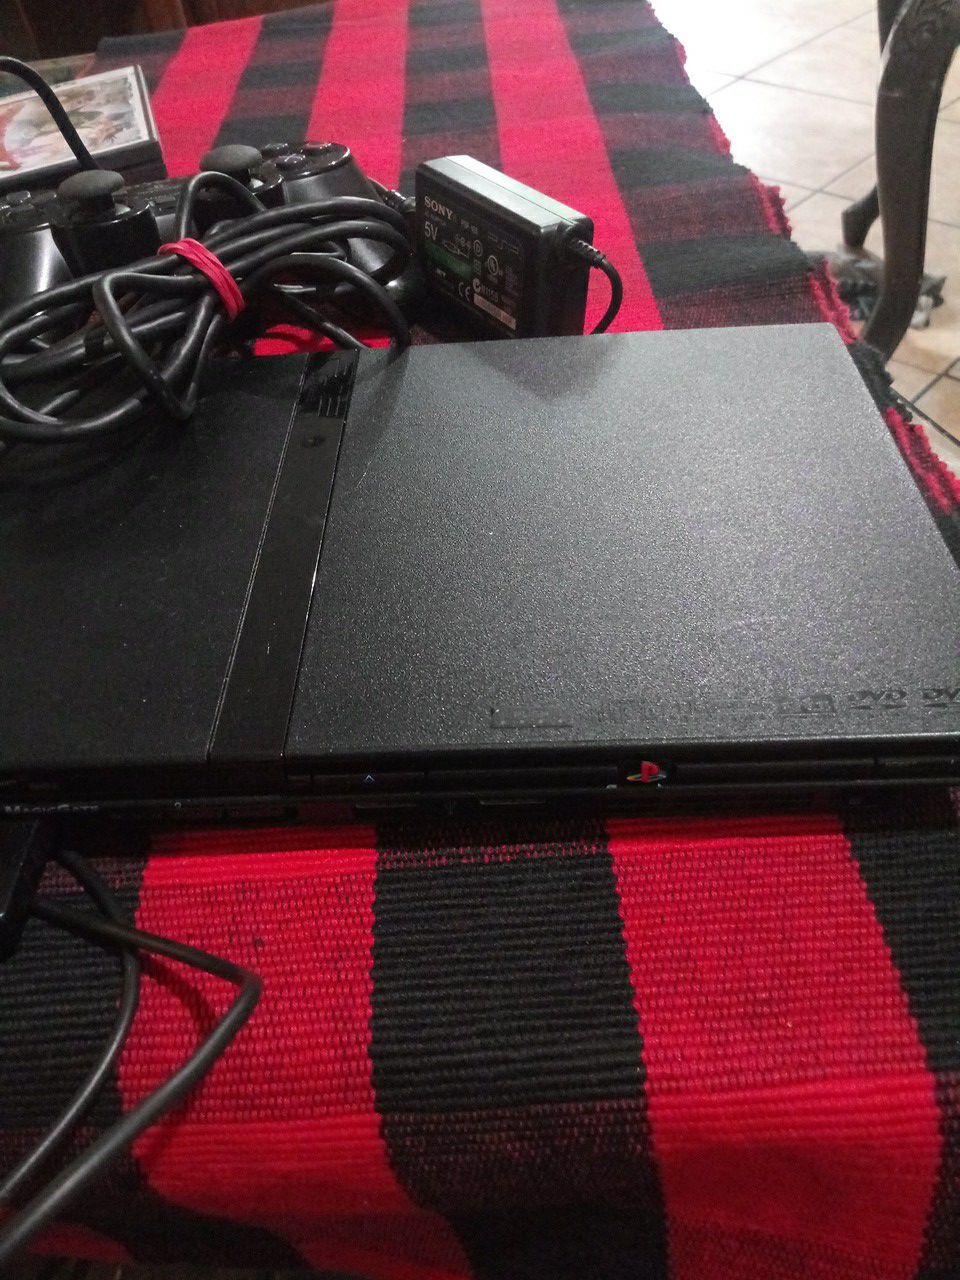 PlayStation 2 untested it light turns red and green no game